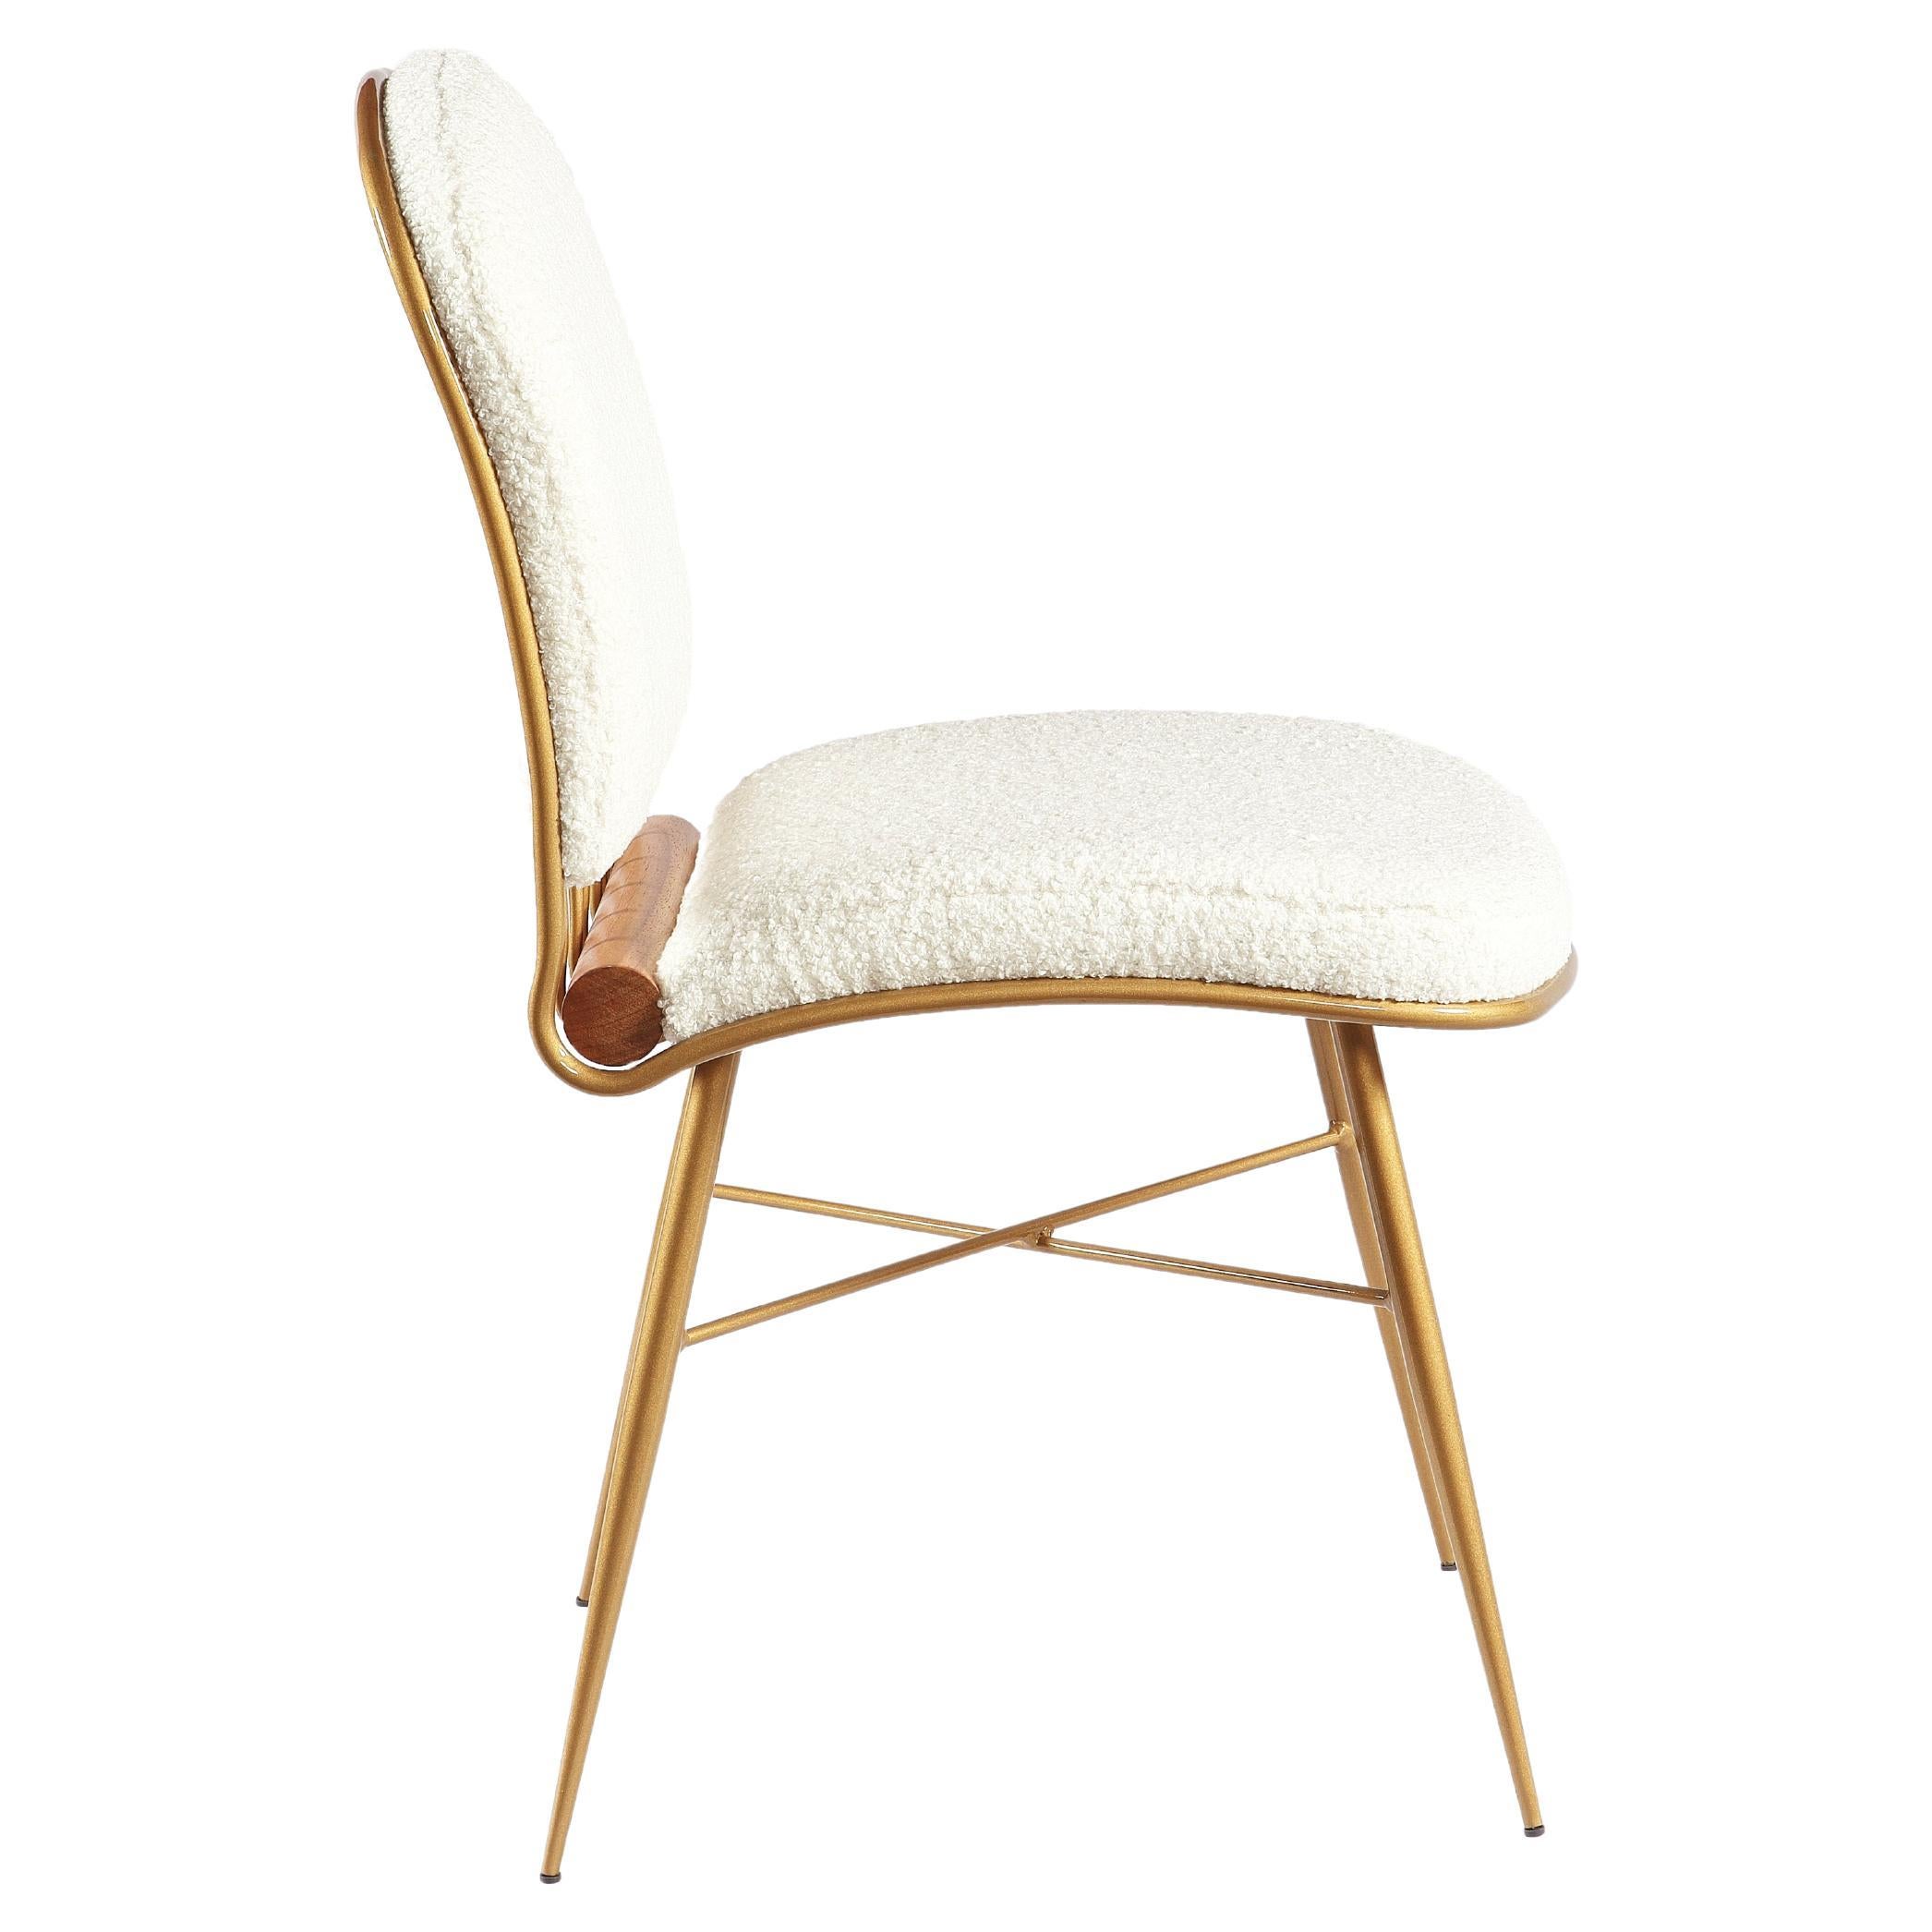 "Cuore" Chair in Matte Golden Carbon Steel, Upholstered in Bouclé Wood Detail